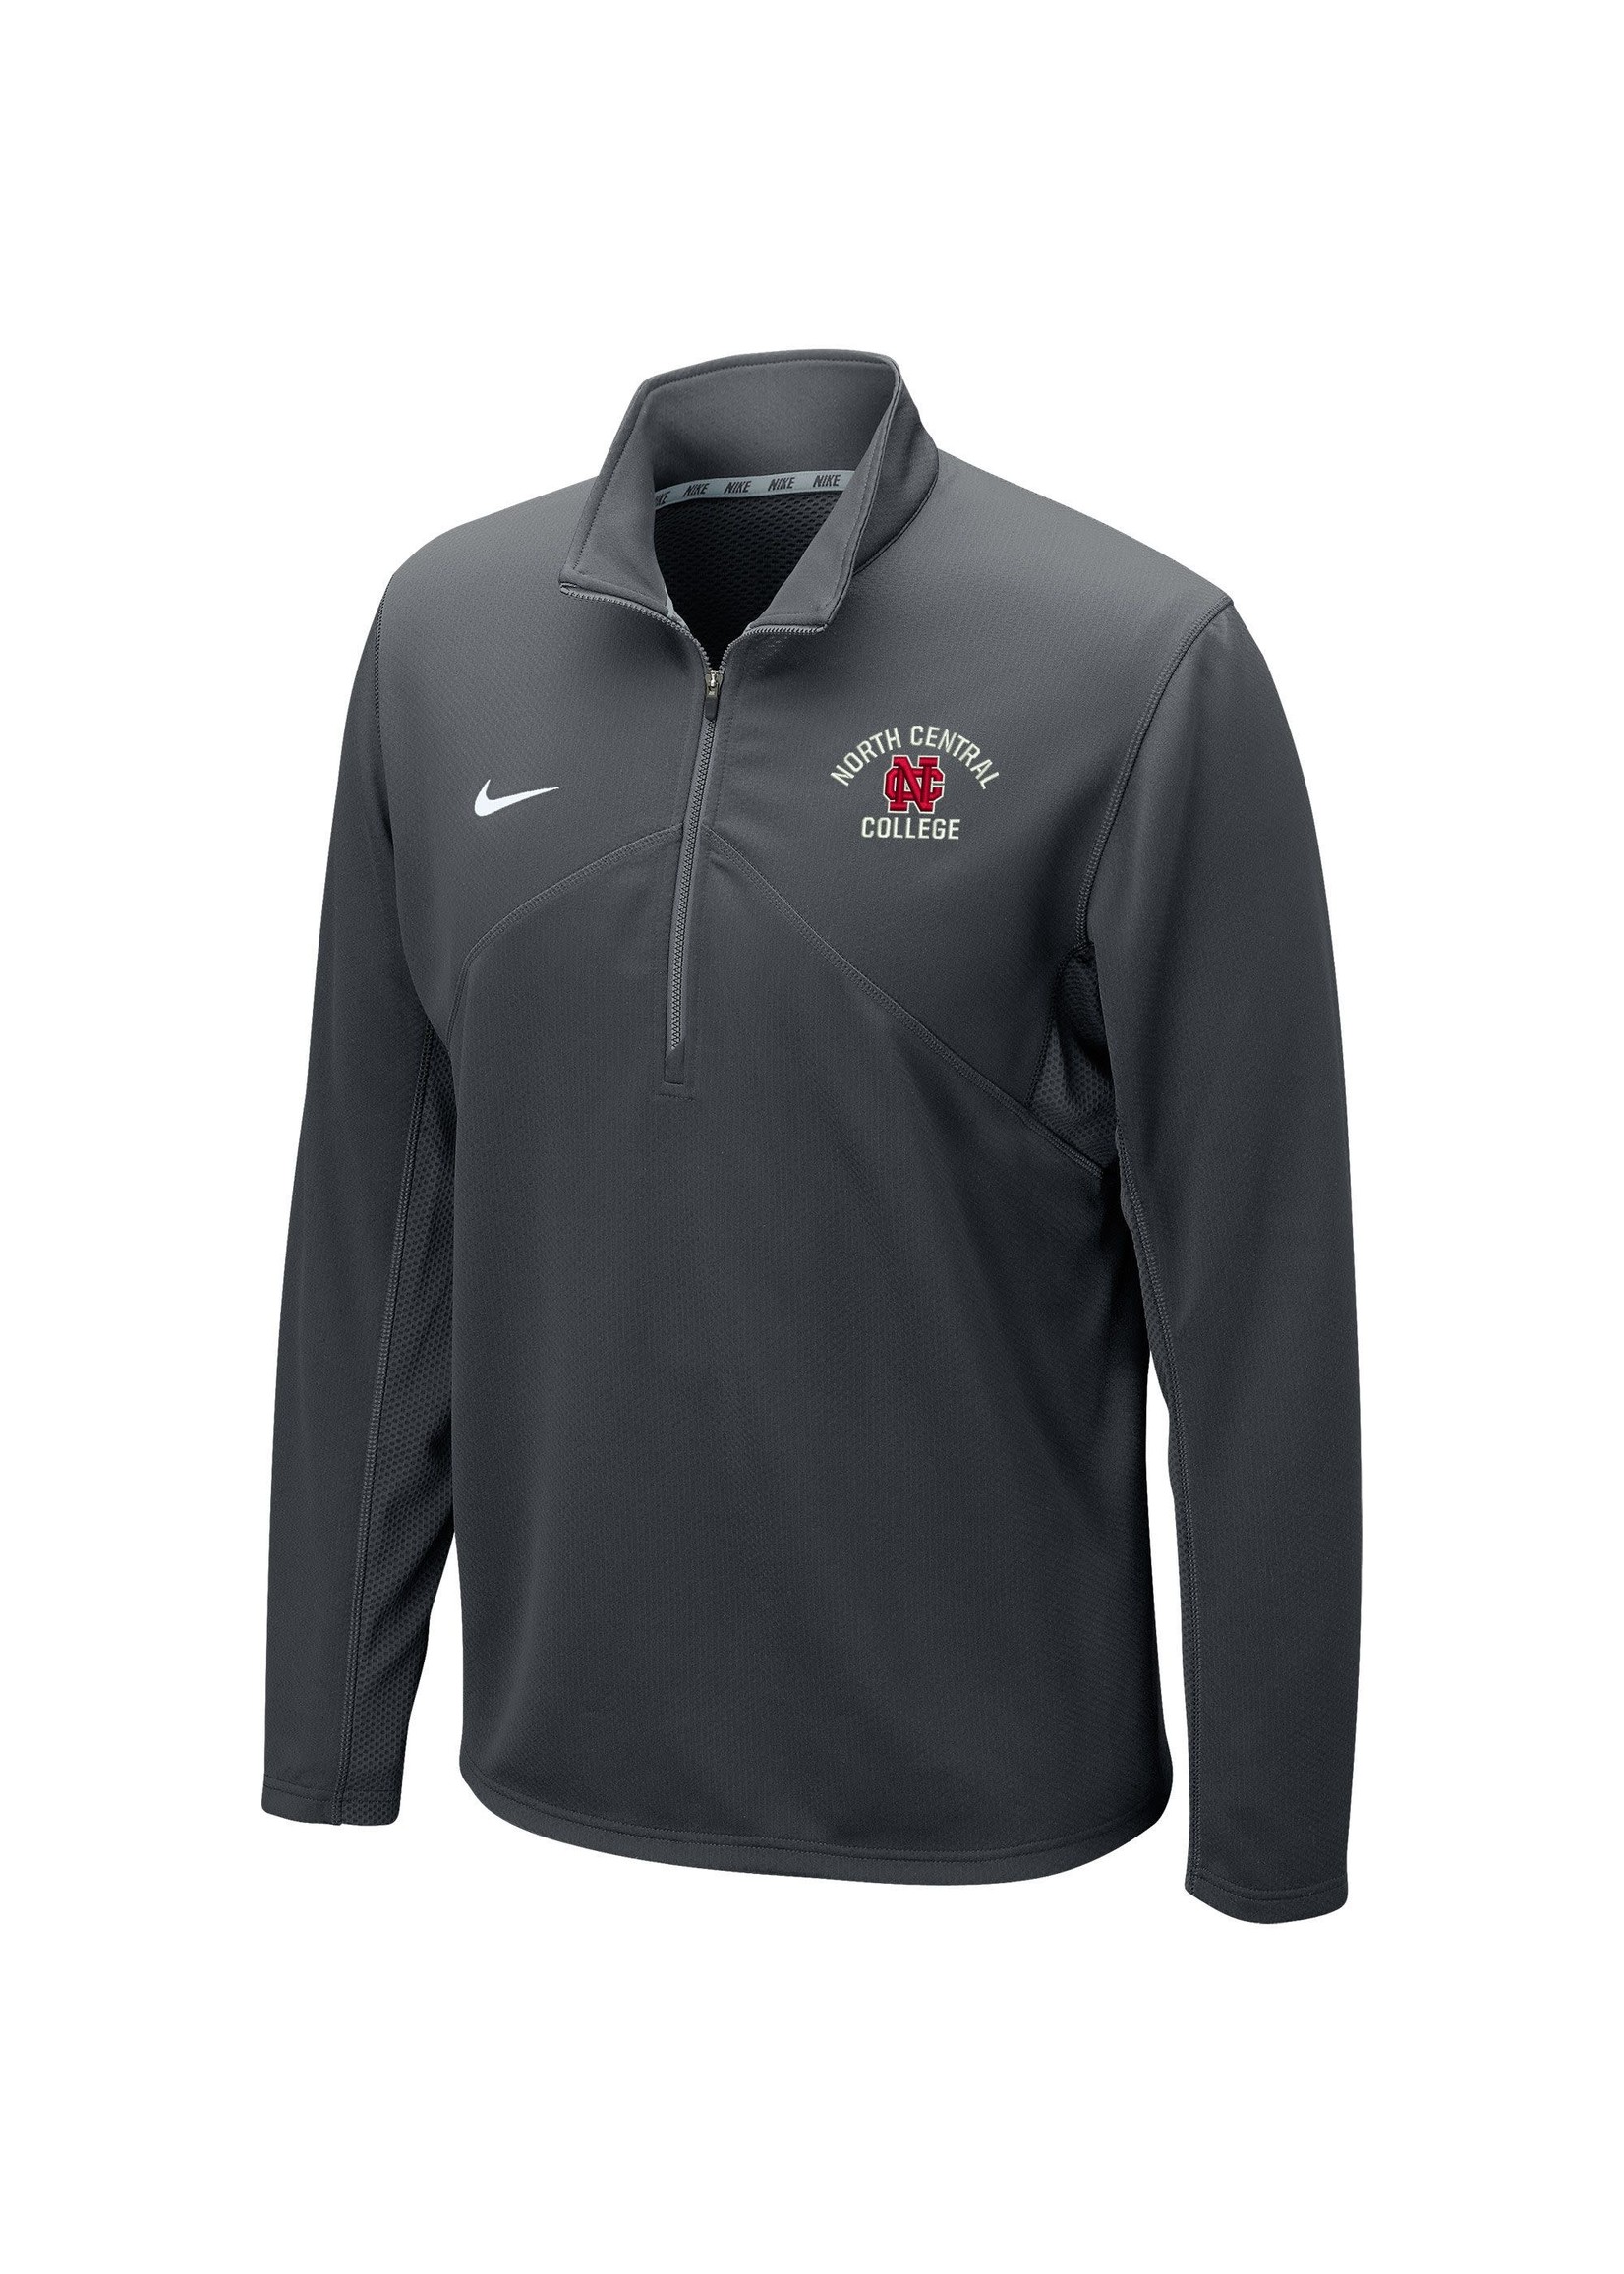 NCC Nike TrainingF22 1/4 Zip w/embroidered logo - North Central College ...